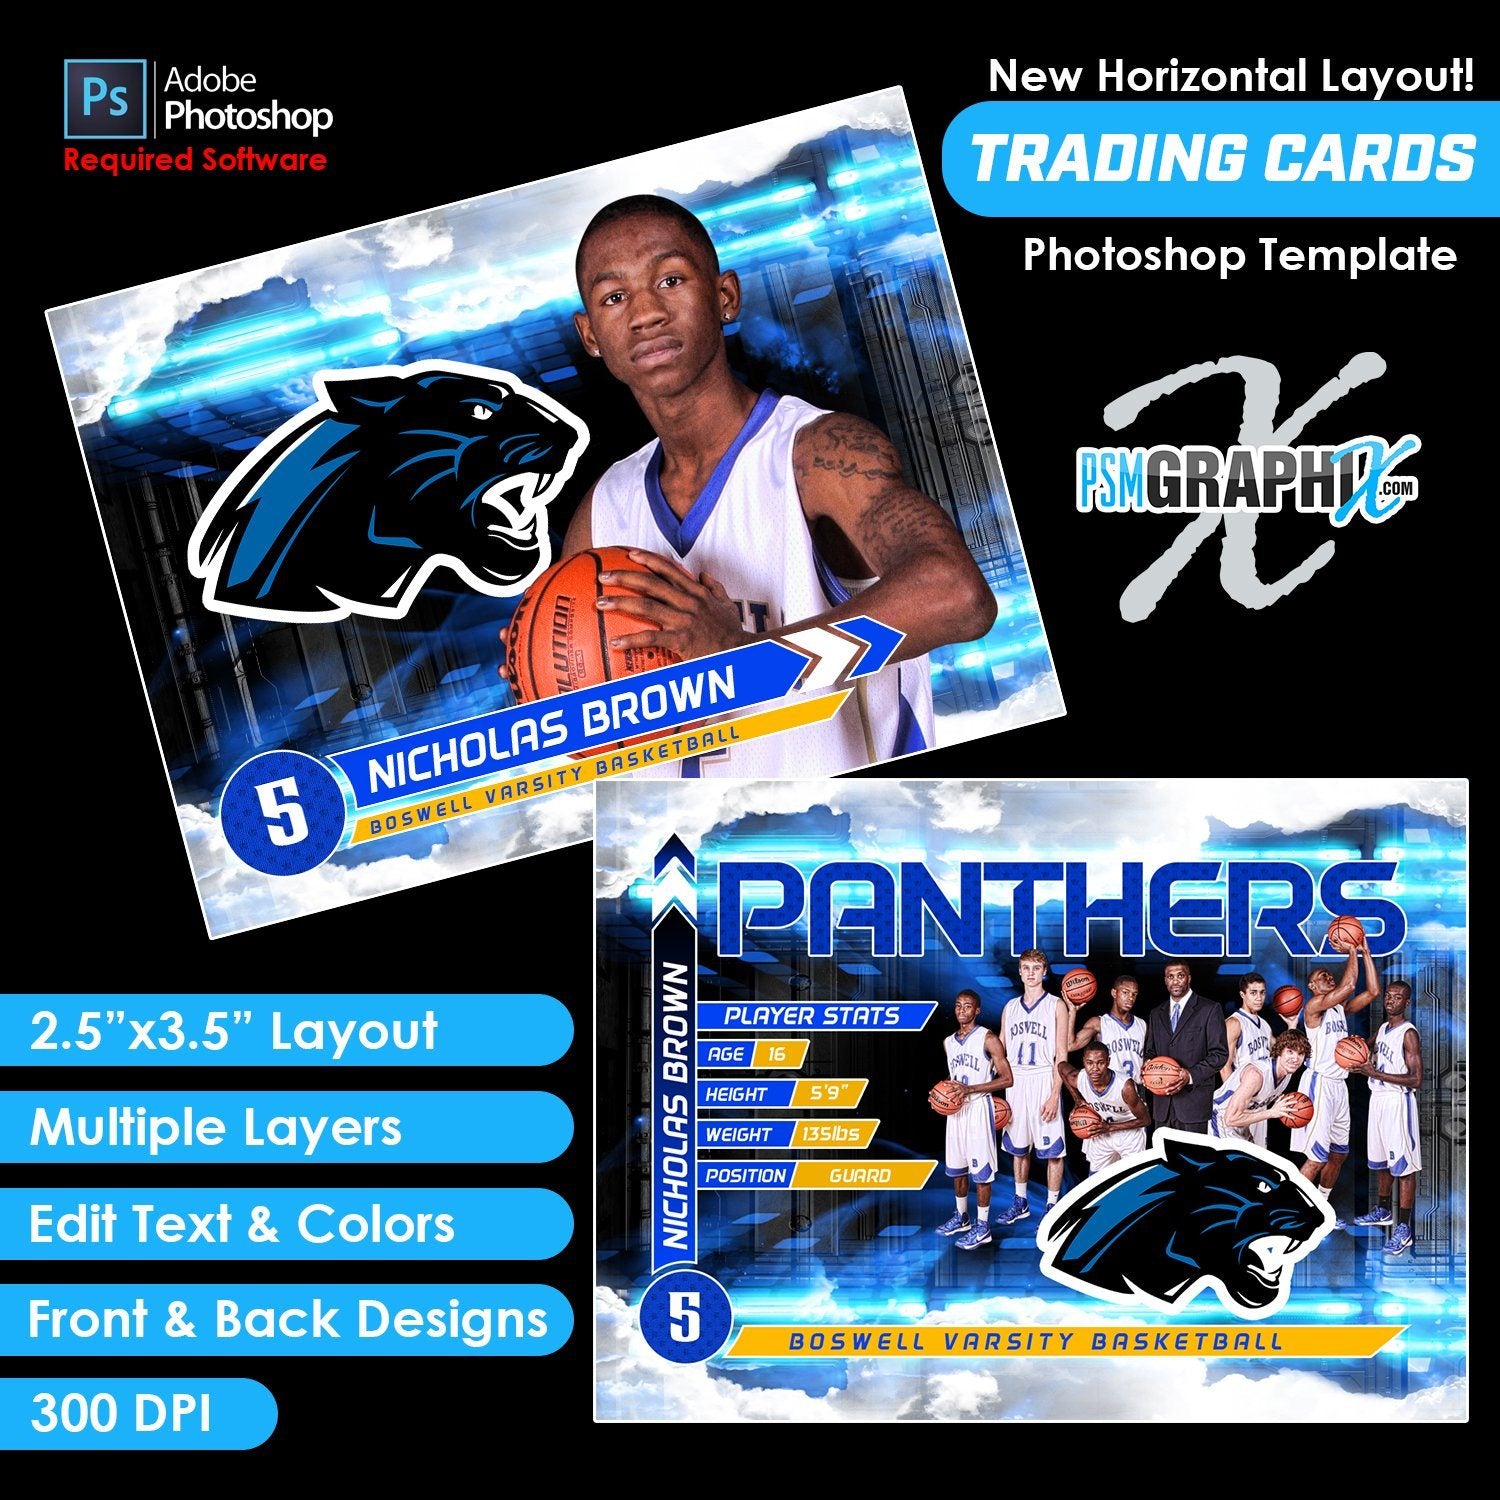 V5 - Full Set - Game Day Trading Card Templates-Photoshop Template - PSMGraphix